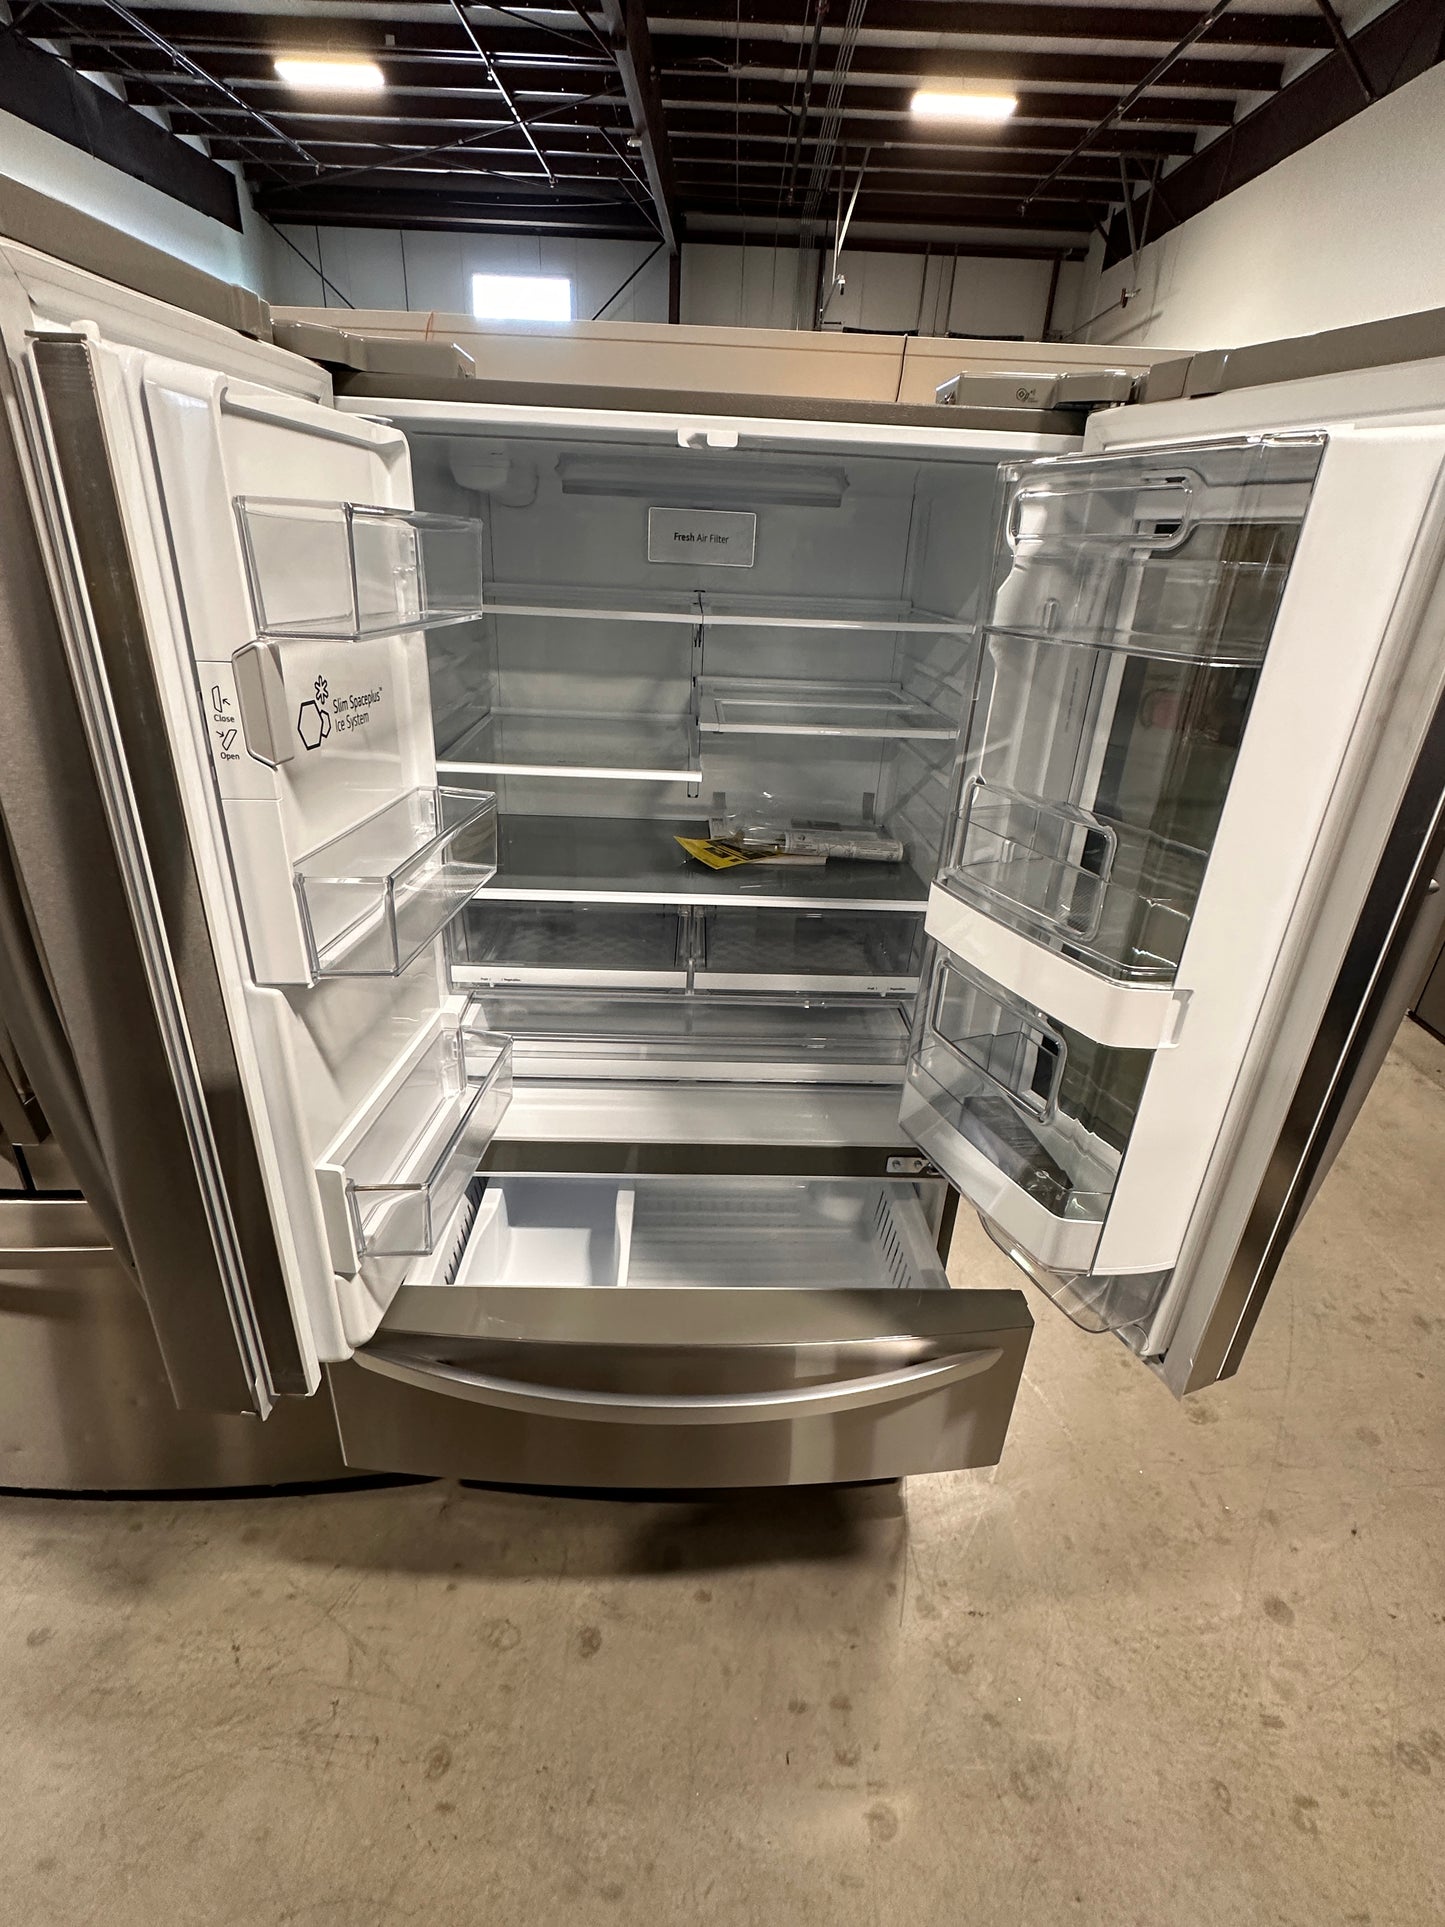 GREAT NEW SMART LG REFRIGERATOR with INSTAVIEW - REF12688